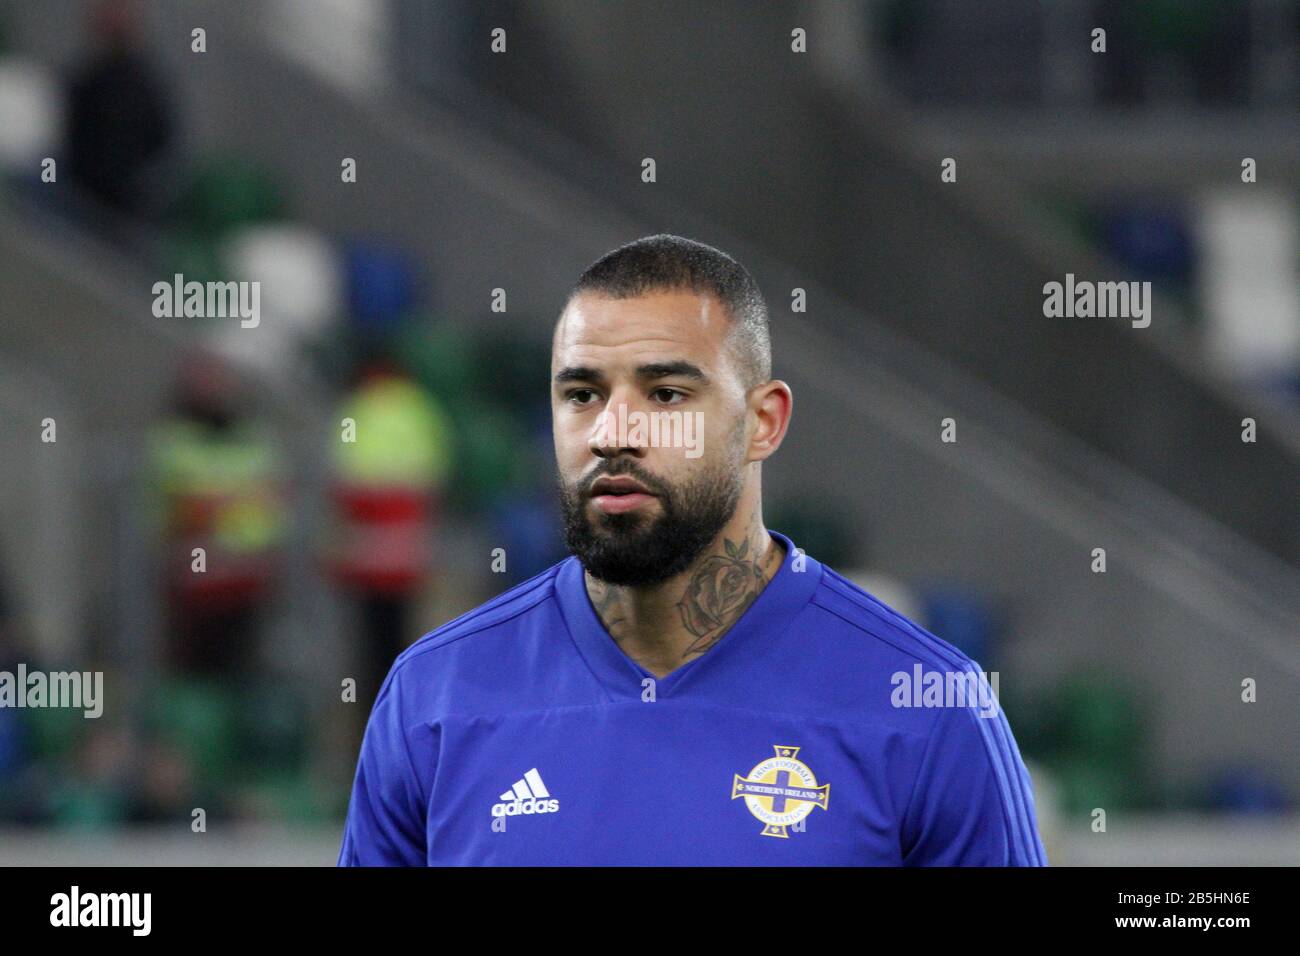 Windsor Park, Belfast, Northern Ireland. 18 November 2018. UEFA Nations League Group B3 - Northern Ireland v Austria. Rotherham striker Kyle Vassell training before the game as part of the Northern Ireland squad. Stock Photo